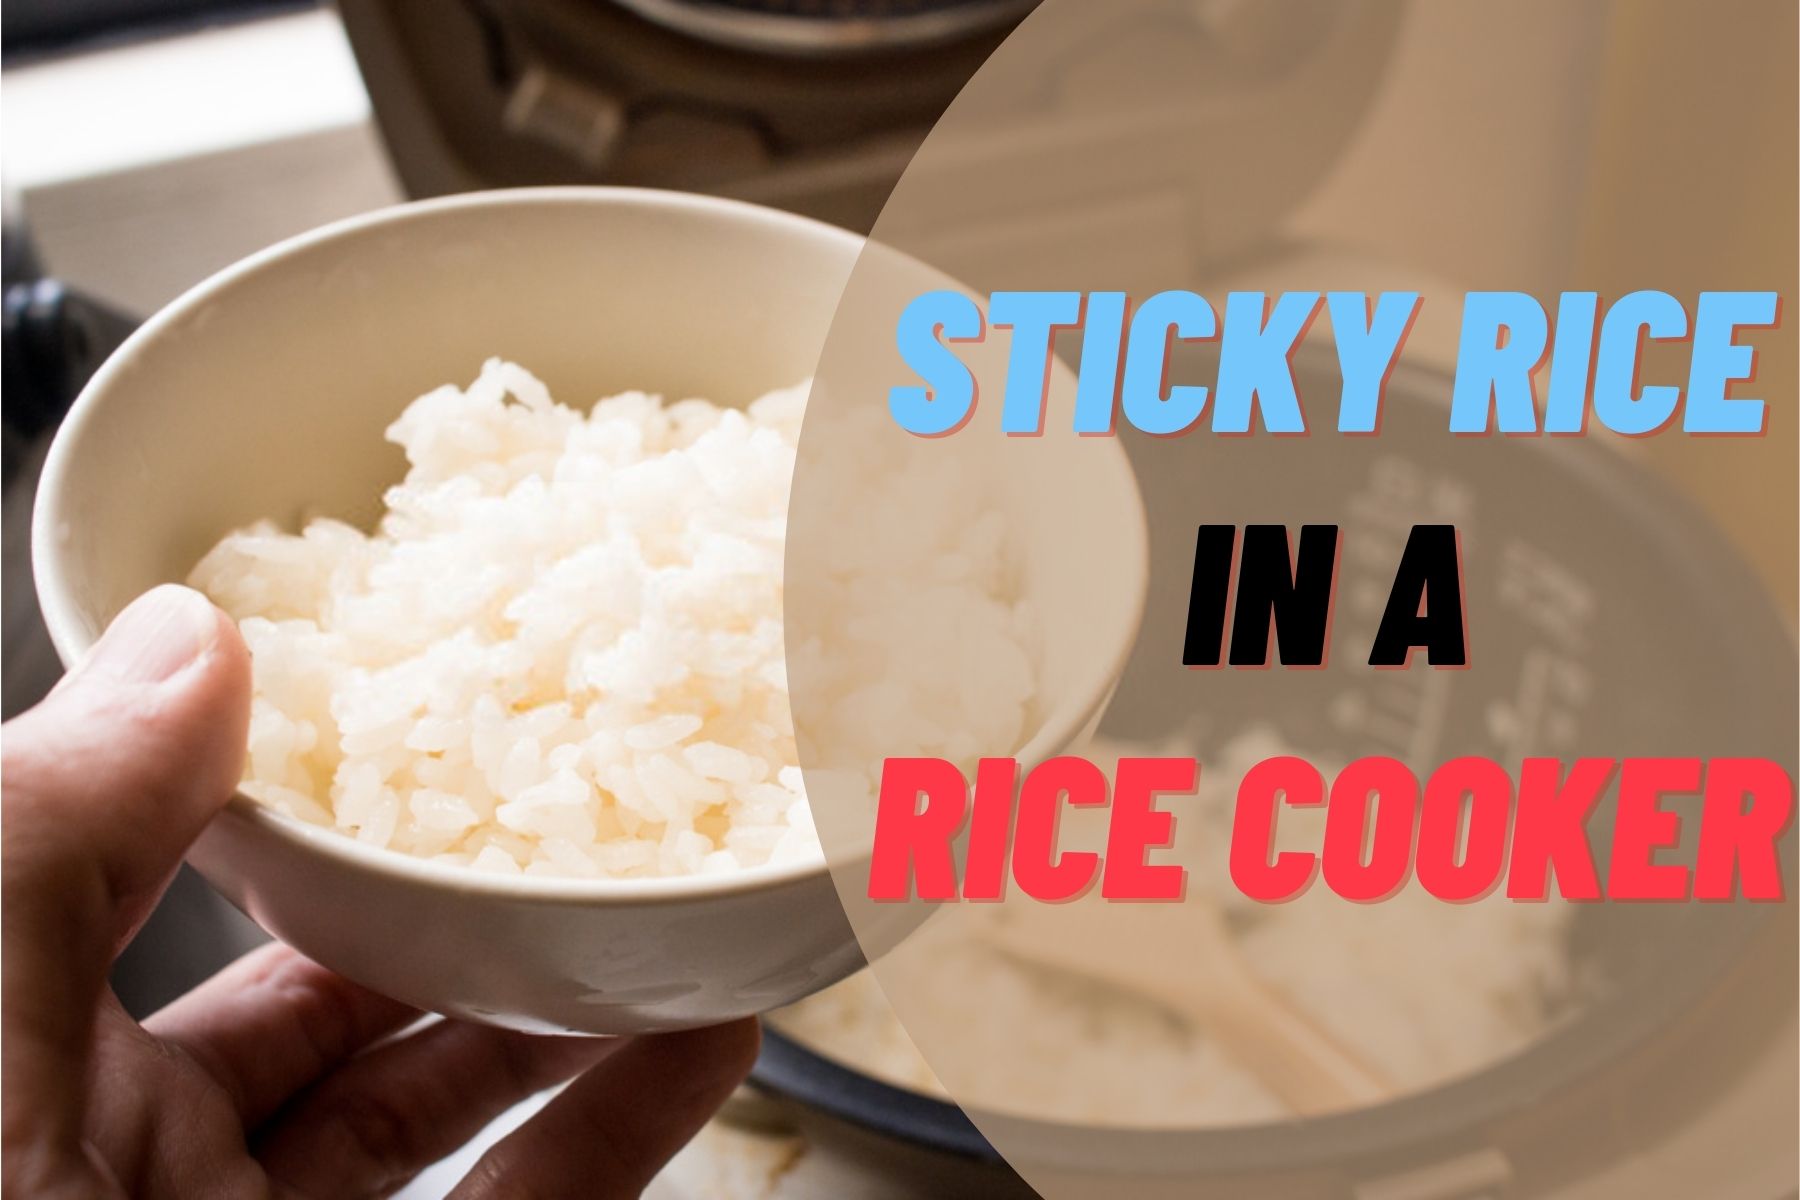 How To Make Sticky Rice In A Rice Cooker